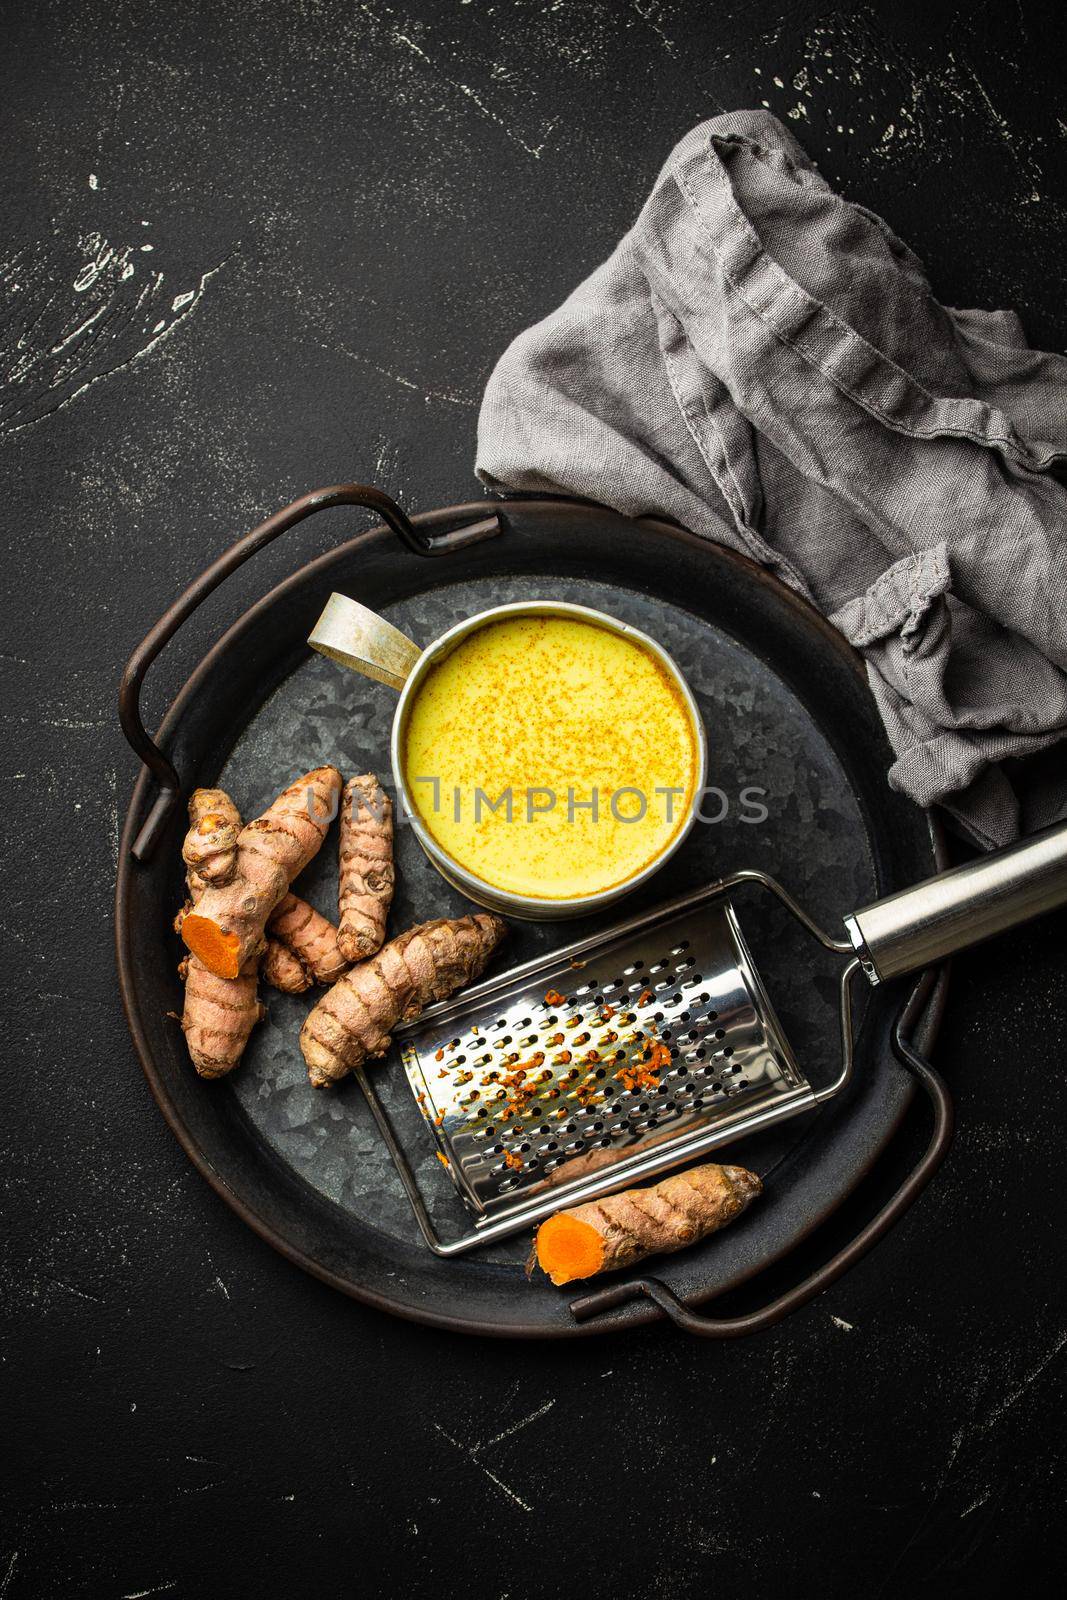 Healthy warm beverage for boosting immune system, turmeric golden milk. Ingredients for cooking detox curcuma milk in rustic tin cup, fresh turmeric root, grater on black stone background, top view.